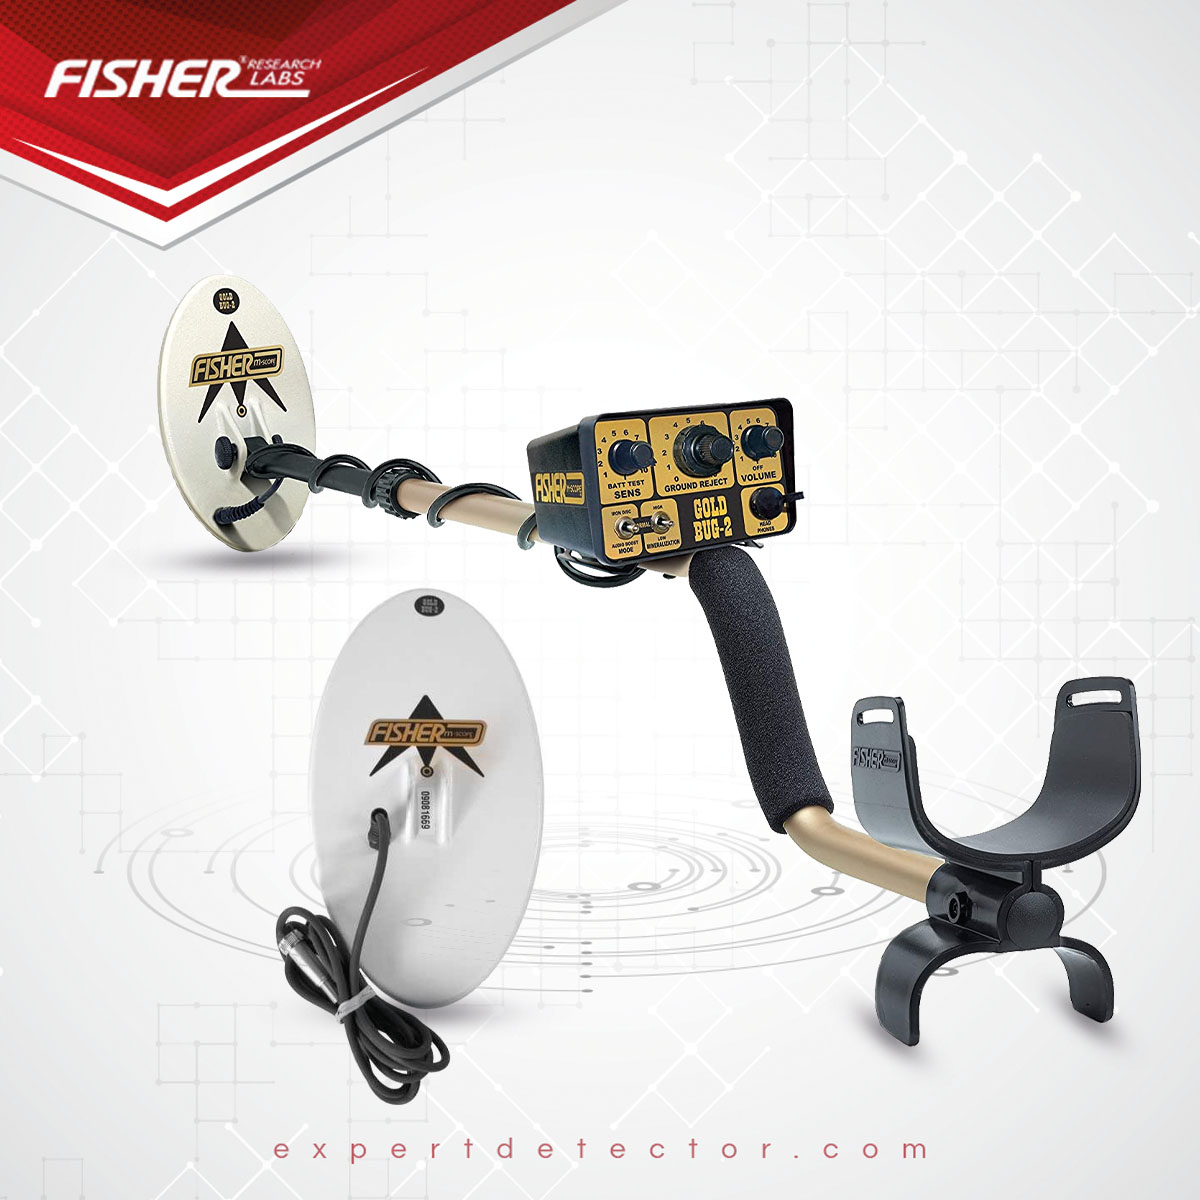 Fisher Gold Bug 2 gold detector